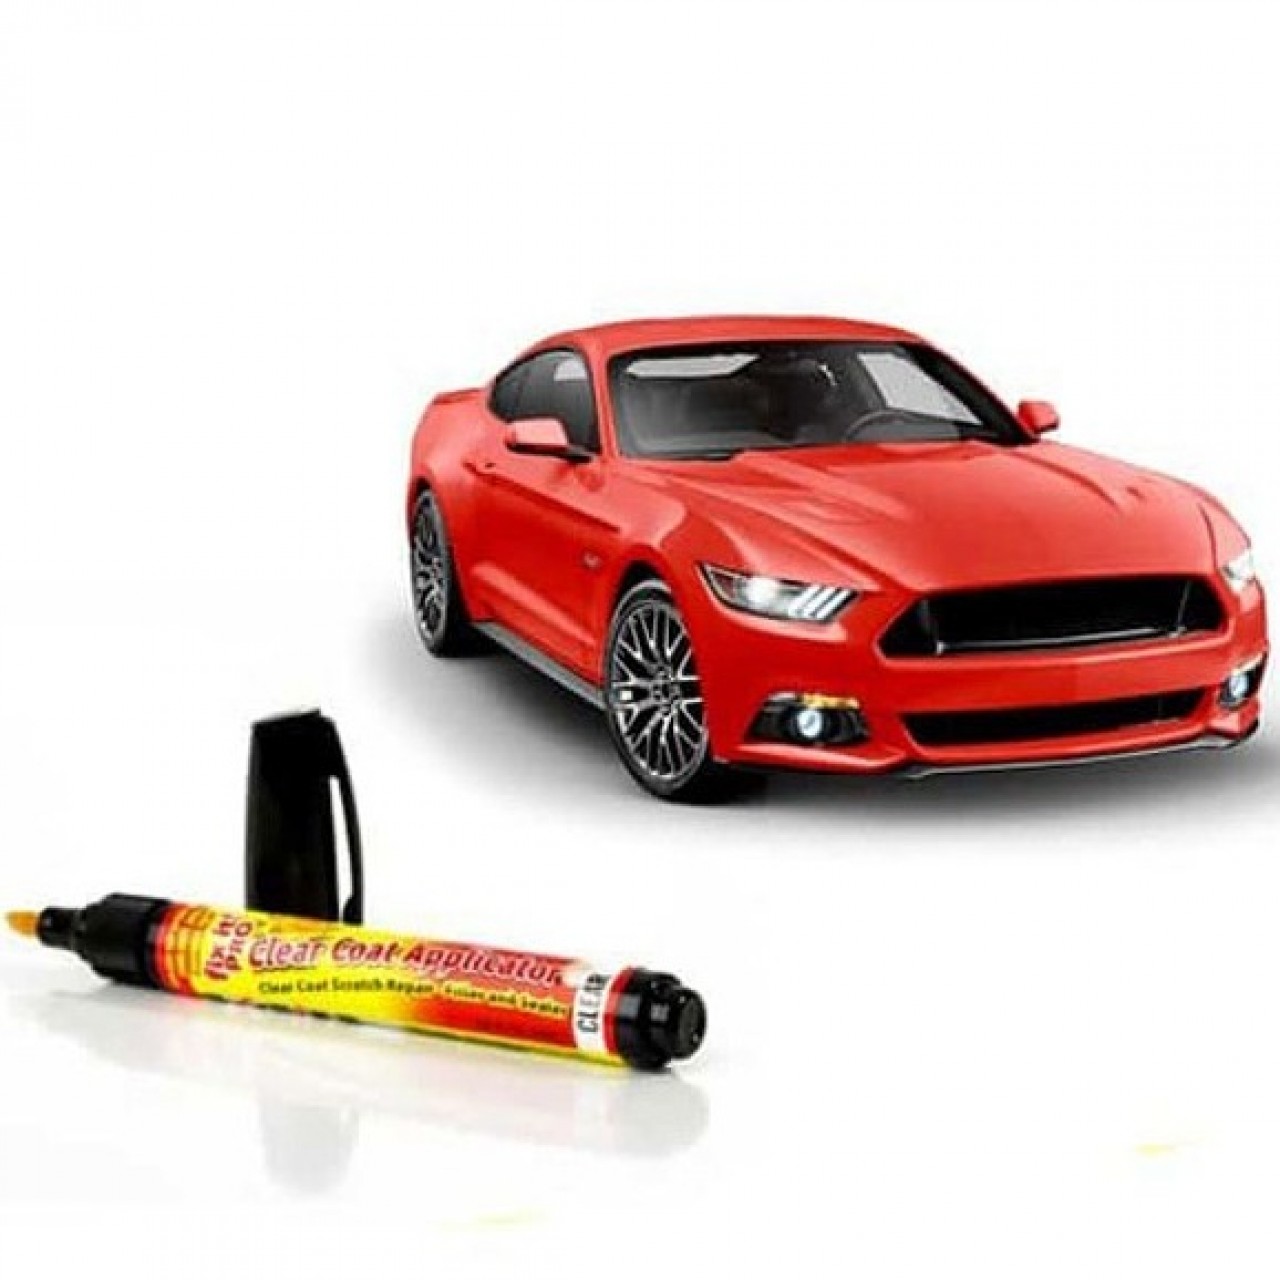 Fastest Scratch Remover Pro For Vehicle